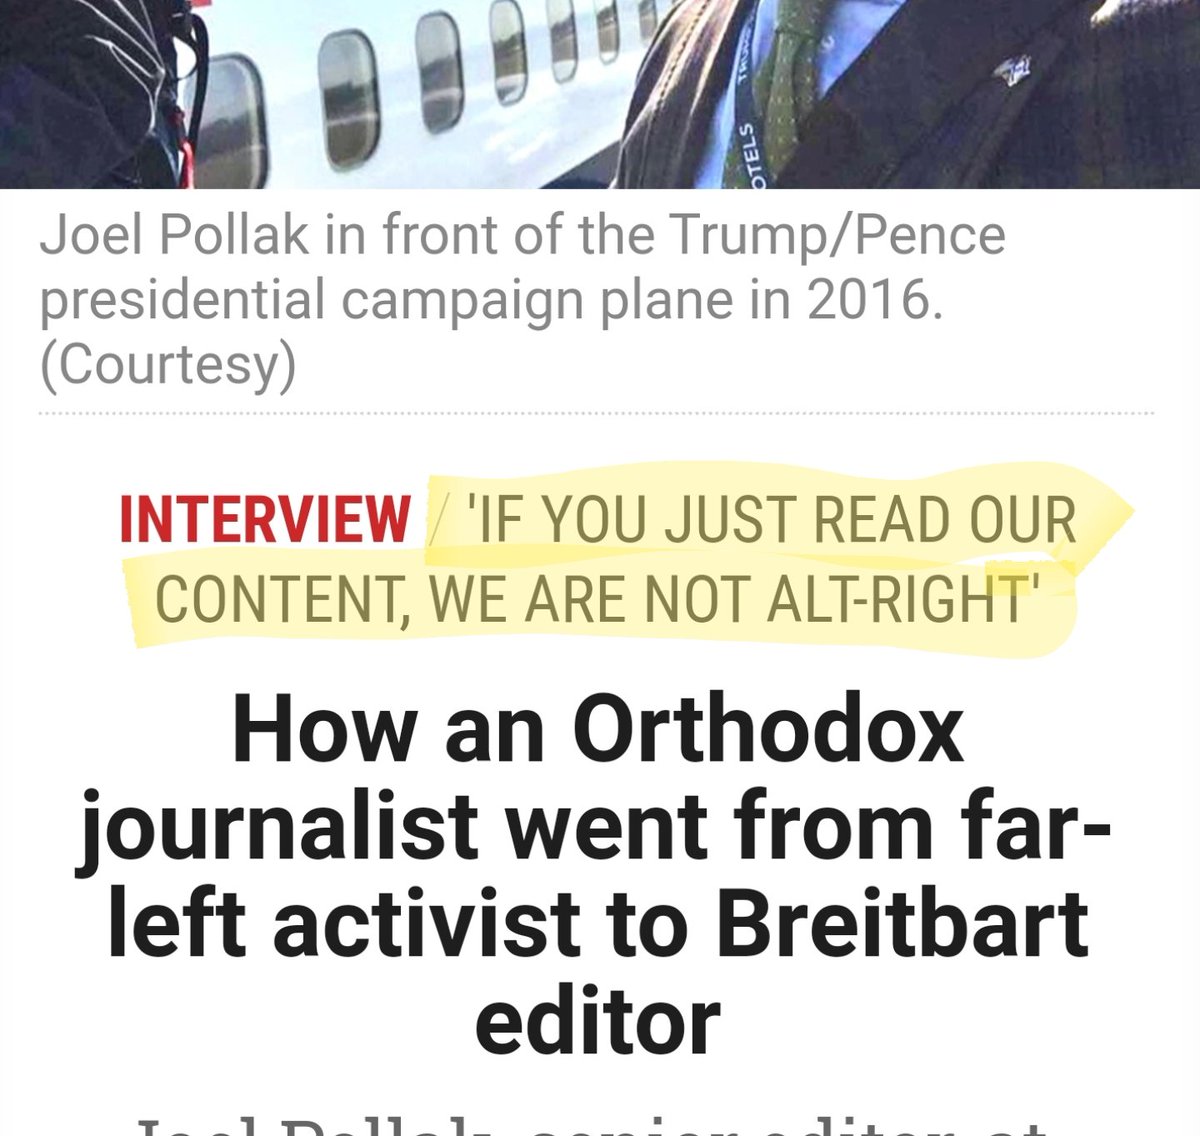 BREITBART EDITOR: "If you just read our content, we are not alt-right." No sh$t.-Pardon Obama!-Vote Joe Biden!-Go San Fran Poop Map!-Go Gavin Newsom!You are  @TimesofIsrael Democrat all the way.